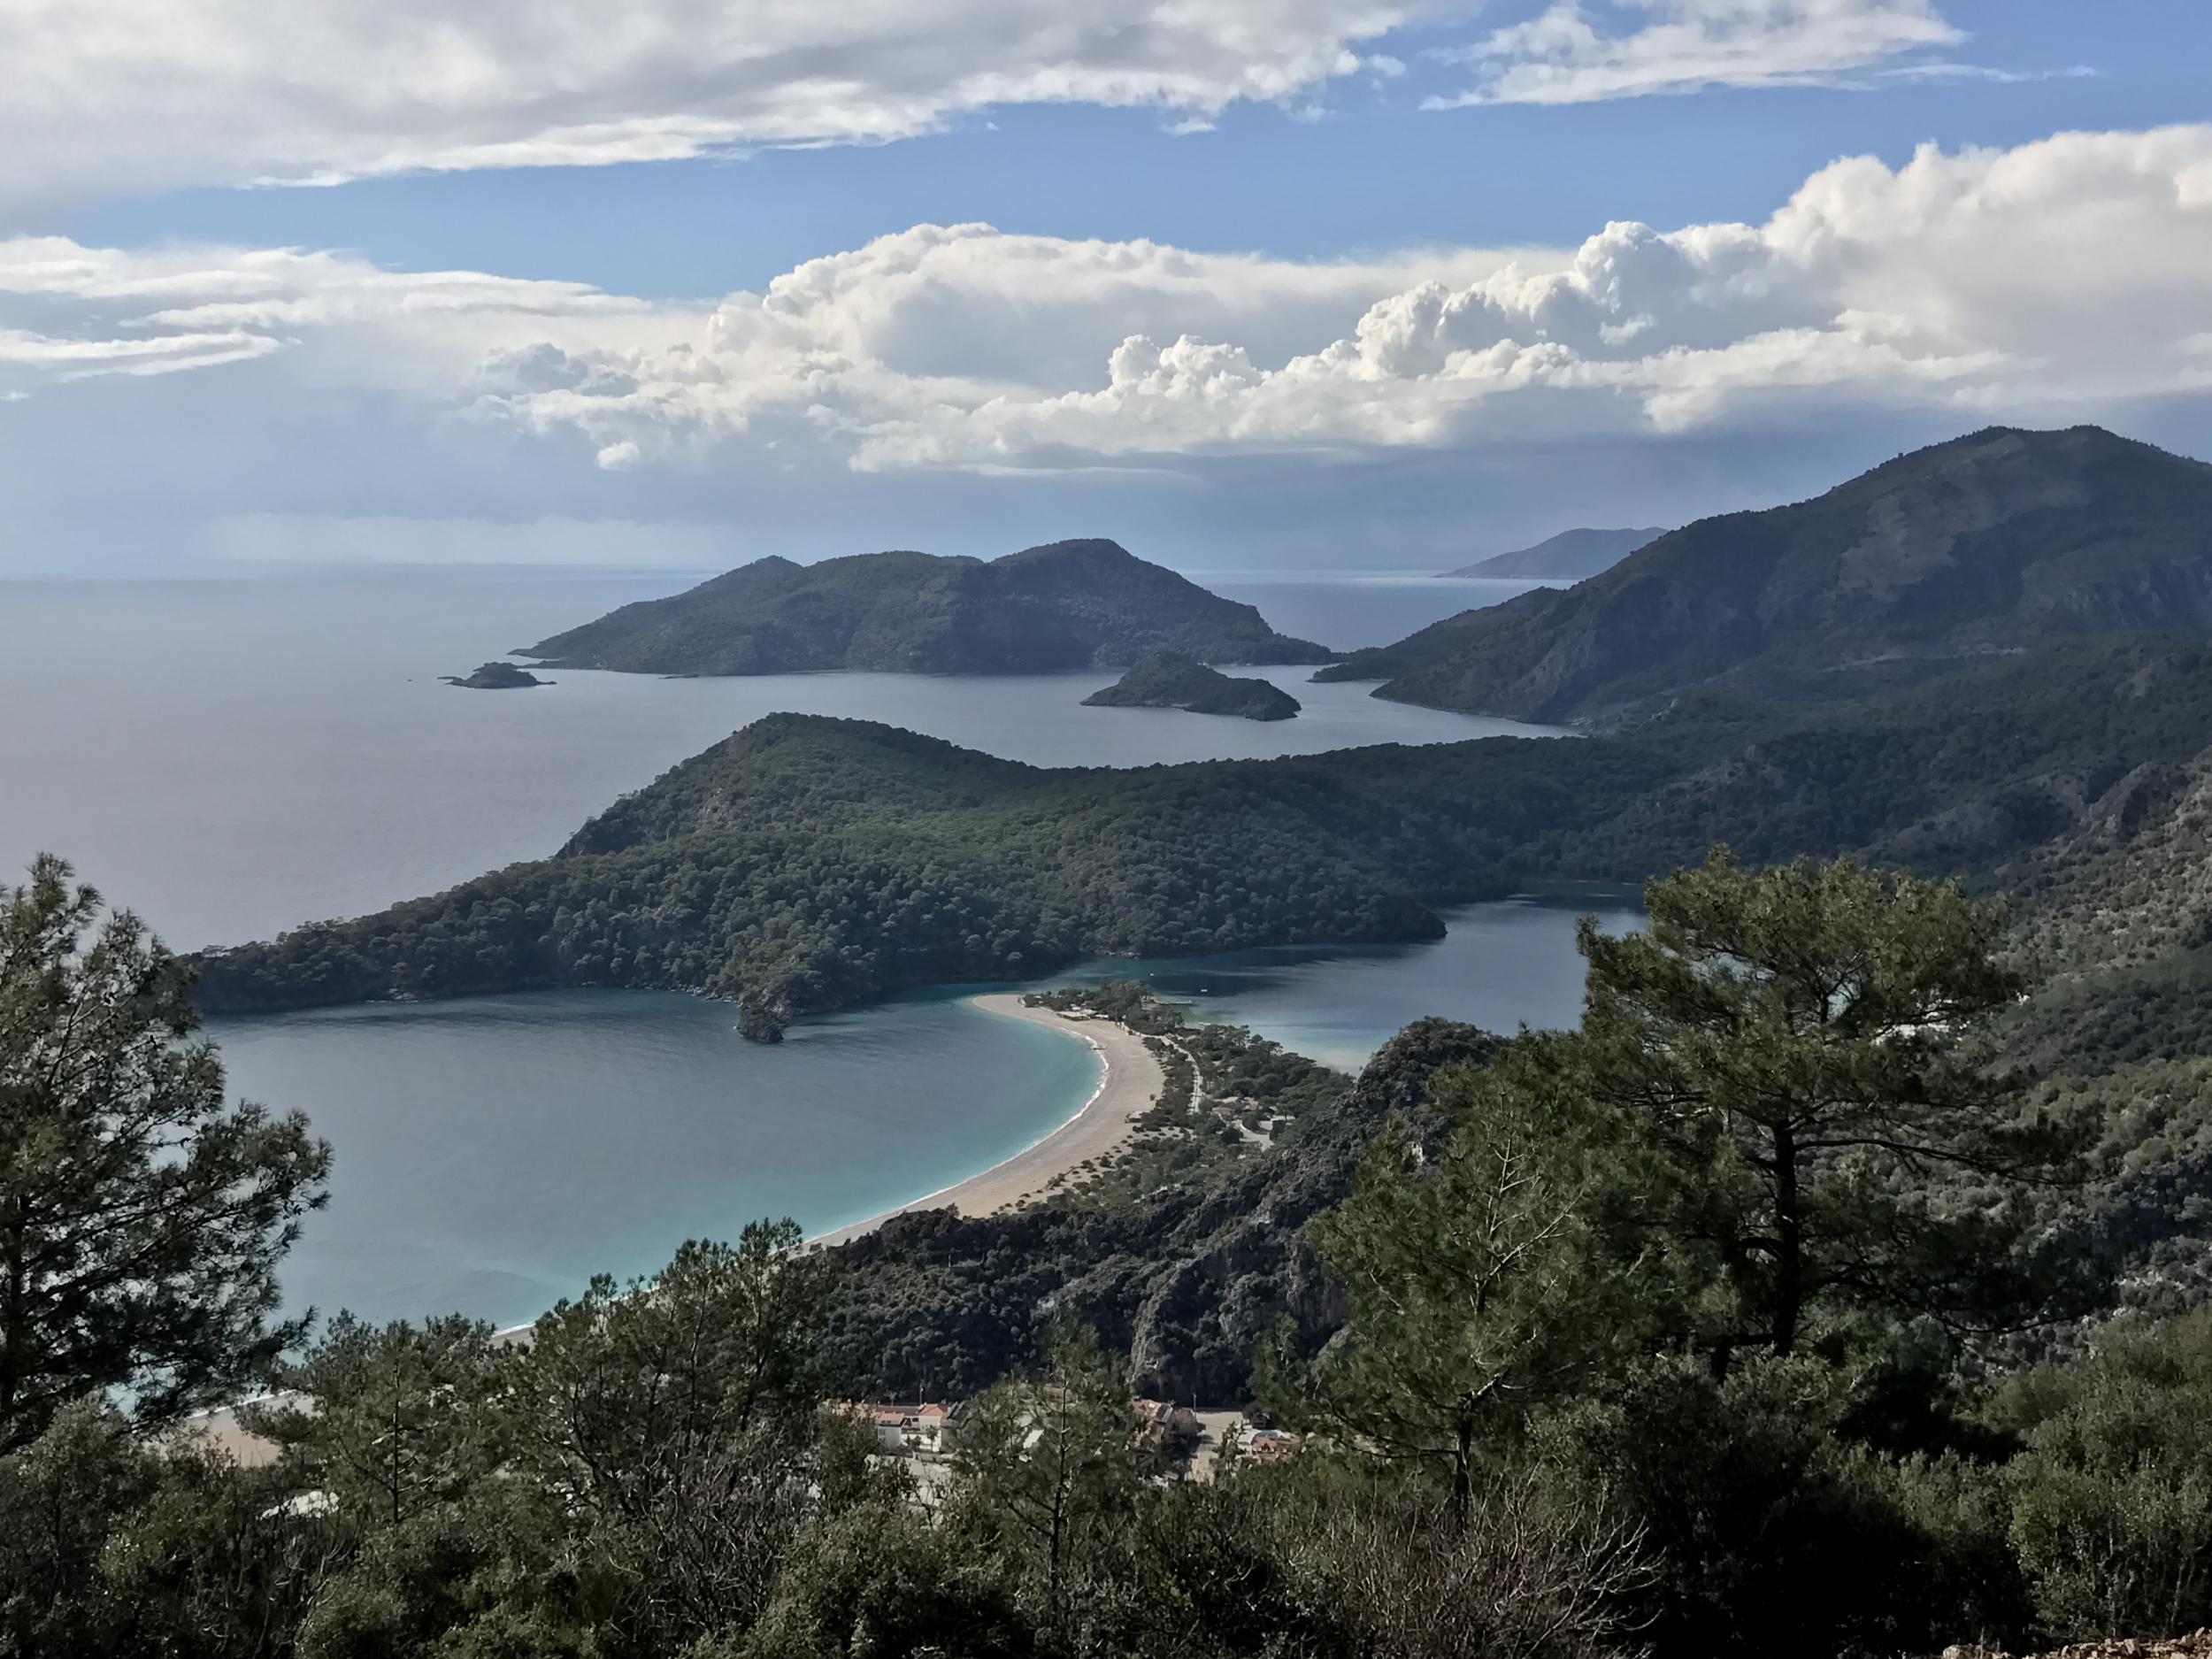 Turkey is back in business this year – coastlines like Fethiye’s will be no longer empty (Emma Thomson)